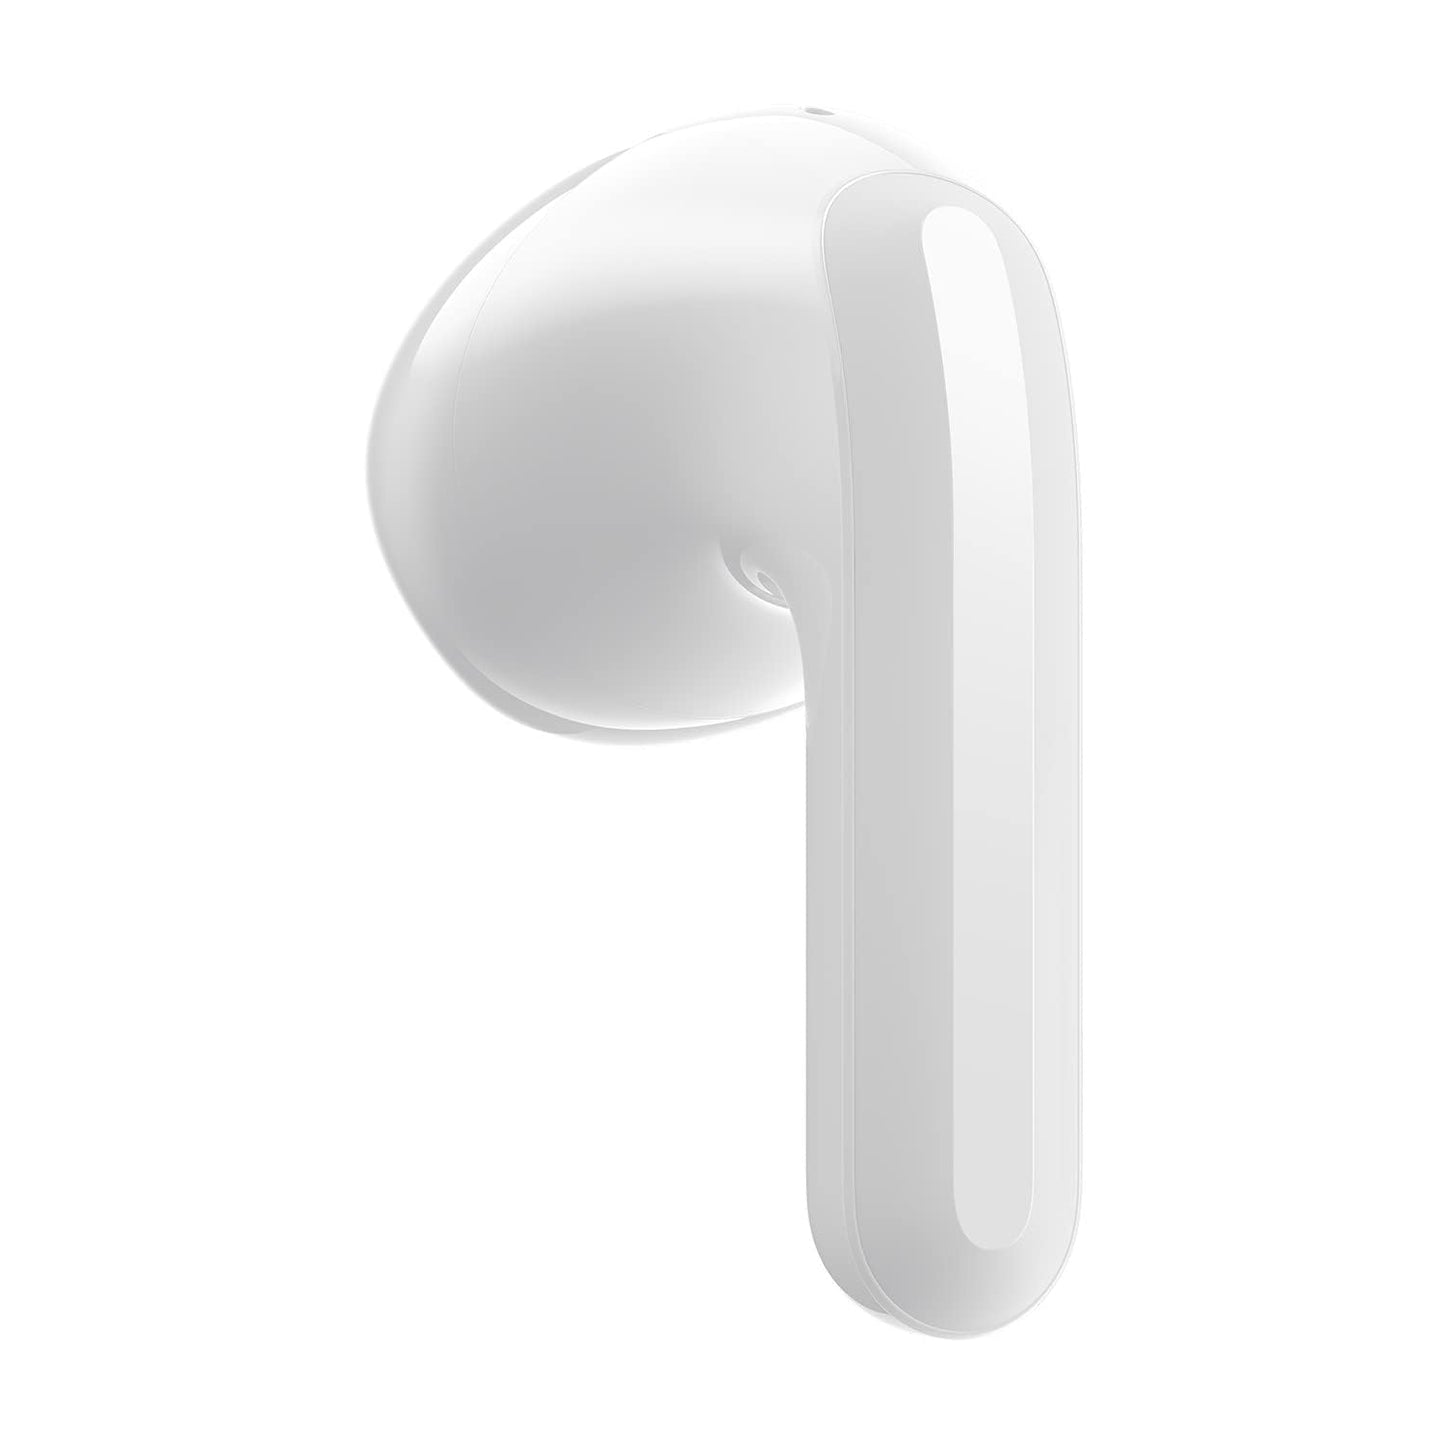 Xiaomi Redmi Buds 4 Lite White - 12mm dynamic driver HD Sound Quality IPX4 water-resistant - Advanced Bluetooth 5.2-18.5 Hours Long Battery Life -Google Fast Pair - Glacier Gray, Wireless